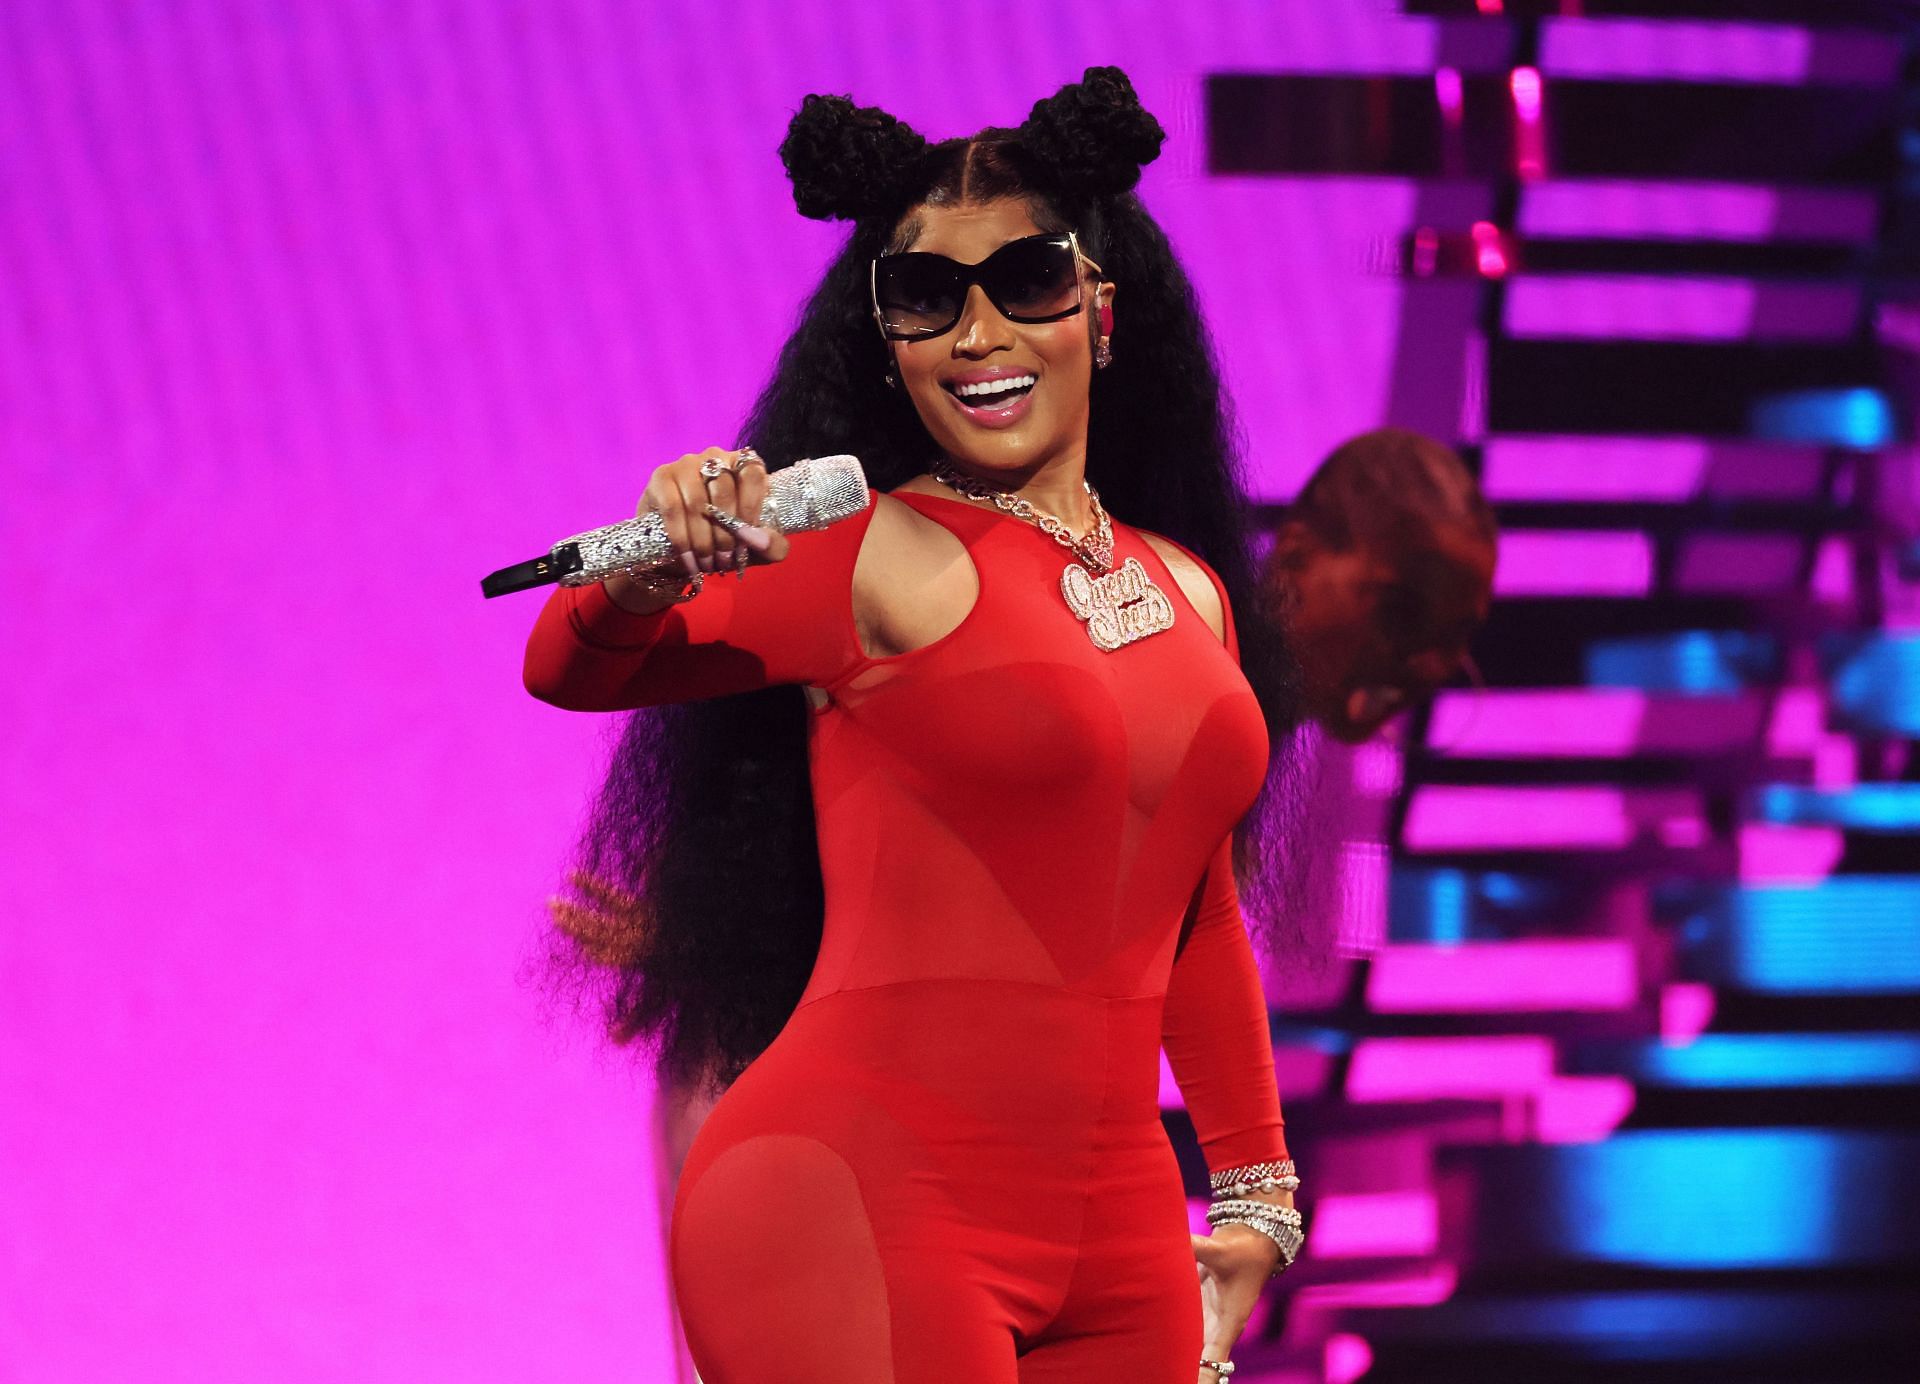 Nicki at the 2023 MTV Video Music Awards. (Photo by Dia Dipasupil/Getty Images)